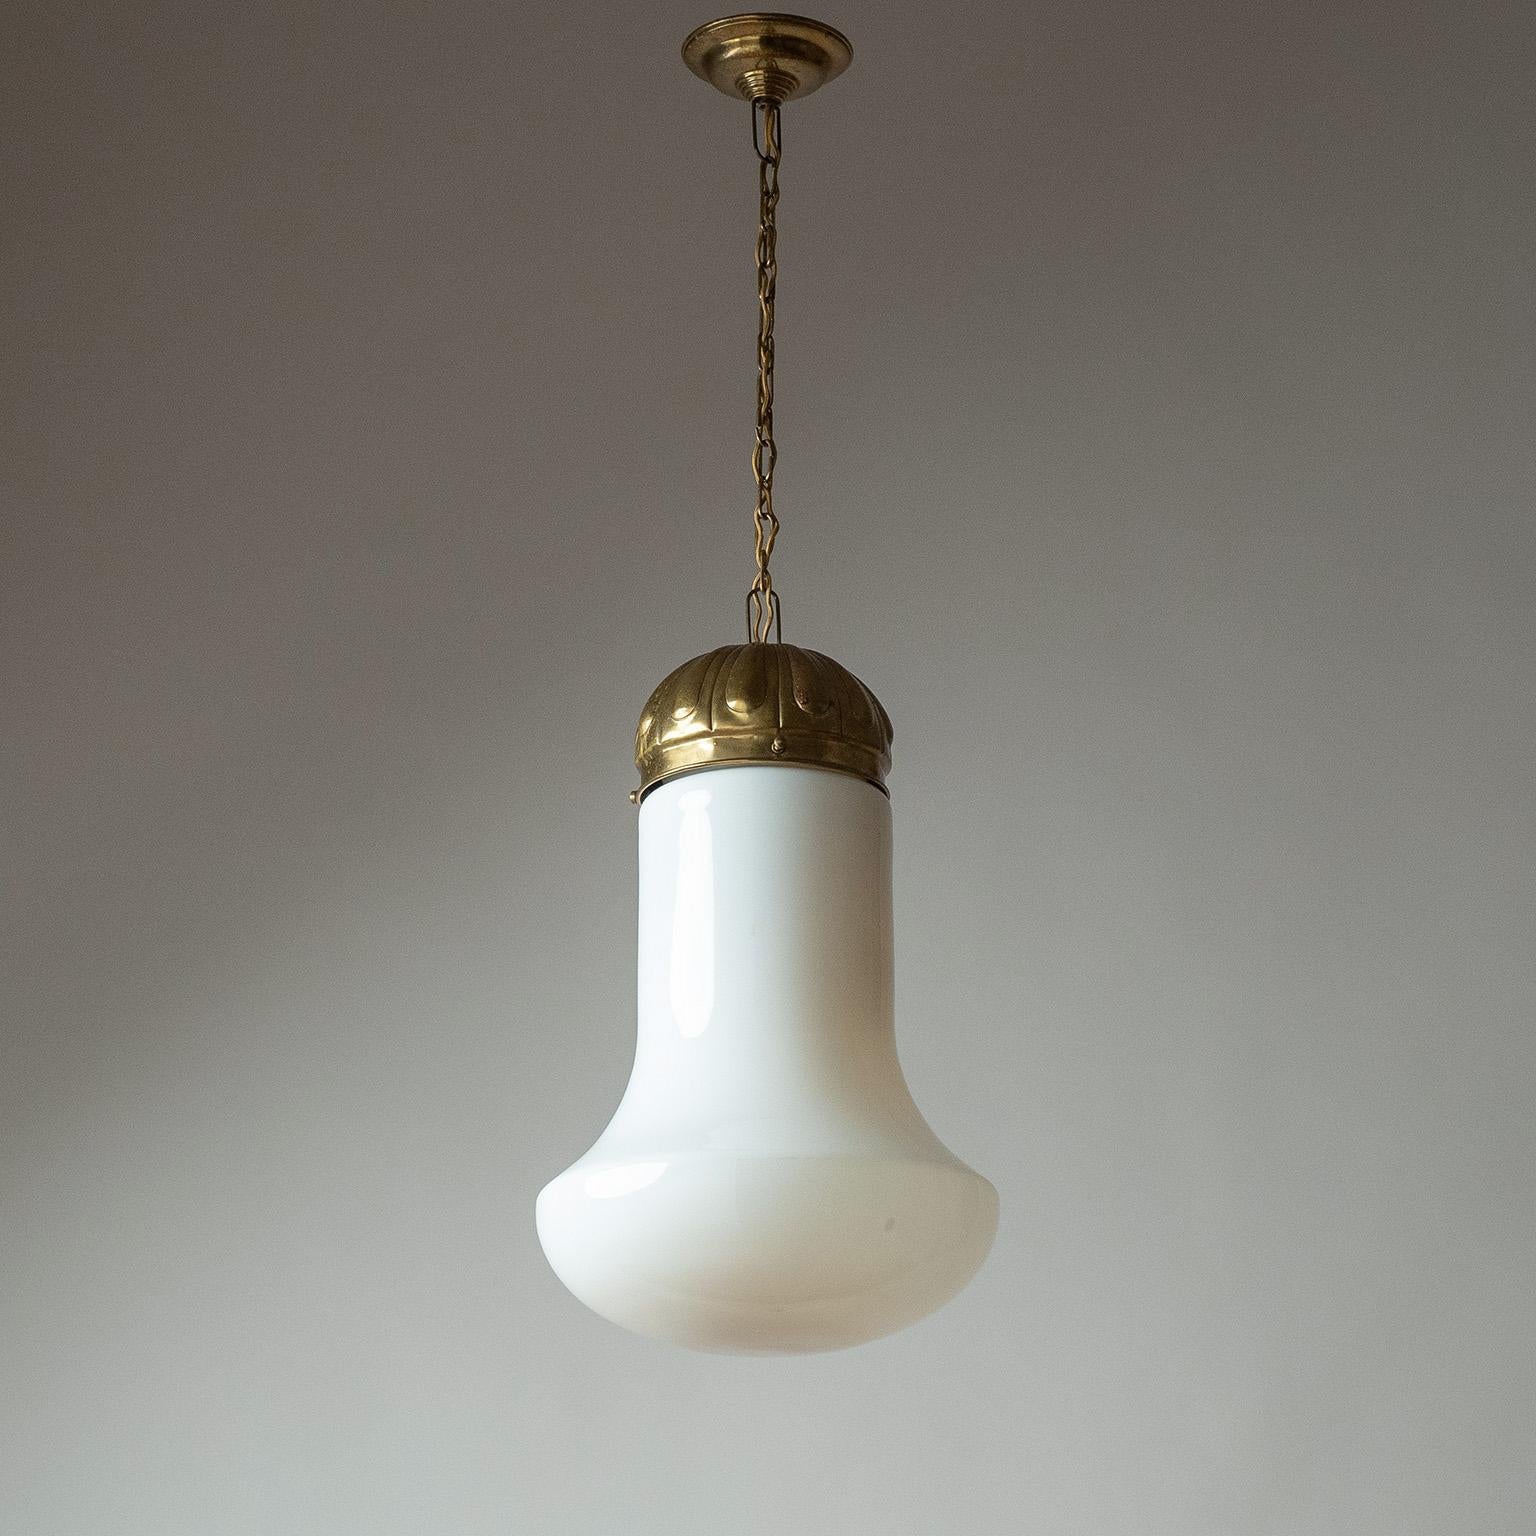 Art Deco milk glass pendant from the 1920-1930s. Nicely detailed brass hardware with a large bell-shaped blown glass diffuser, which has some varying degrees of opacity. One original brass and ceramic E27 socket with new wiring. 
Measures: Height